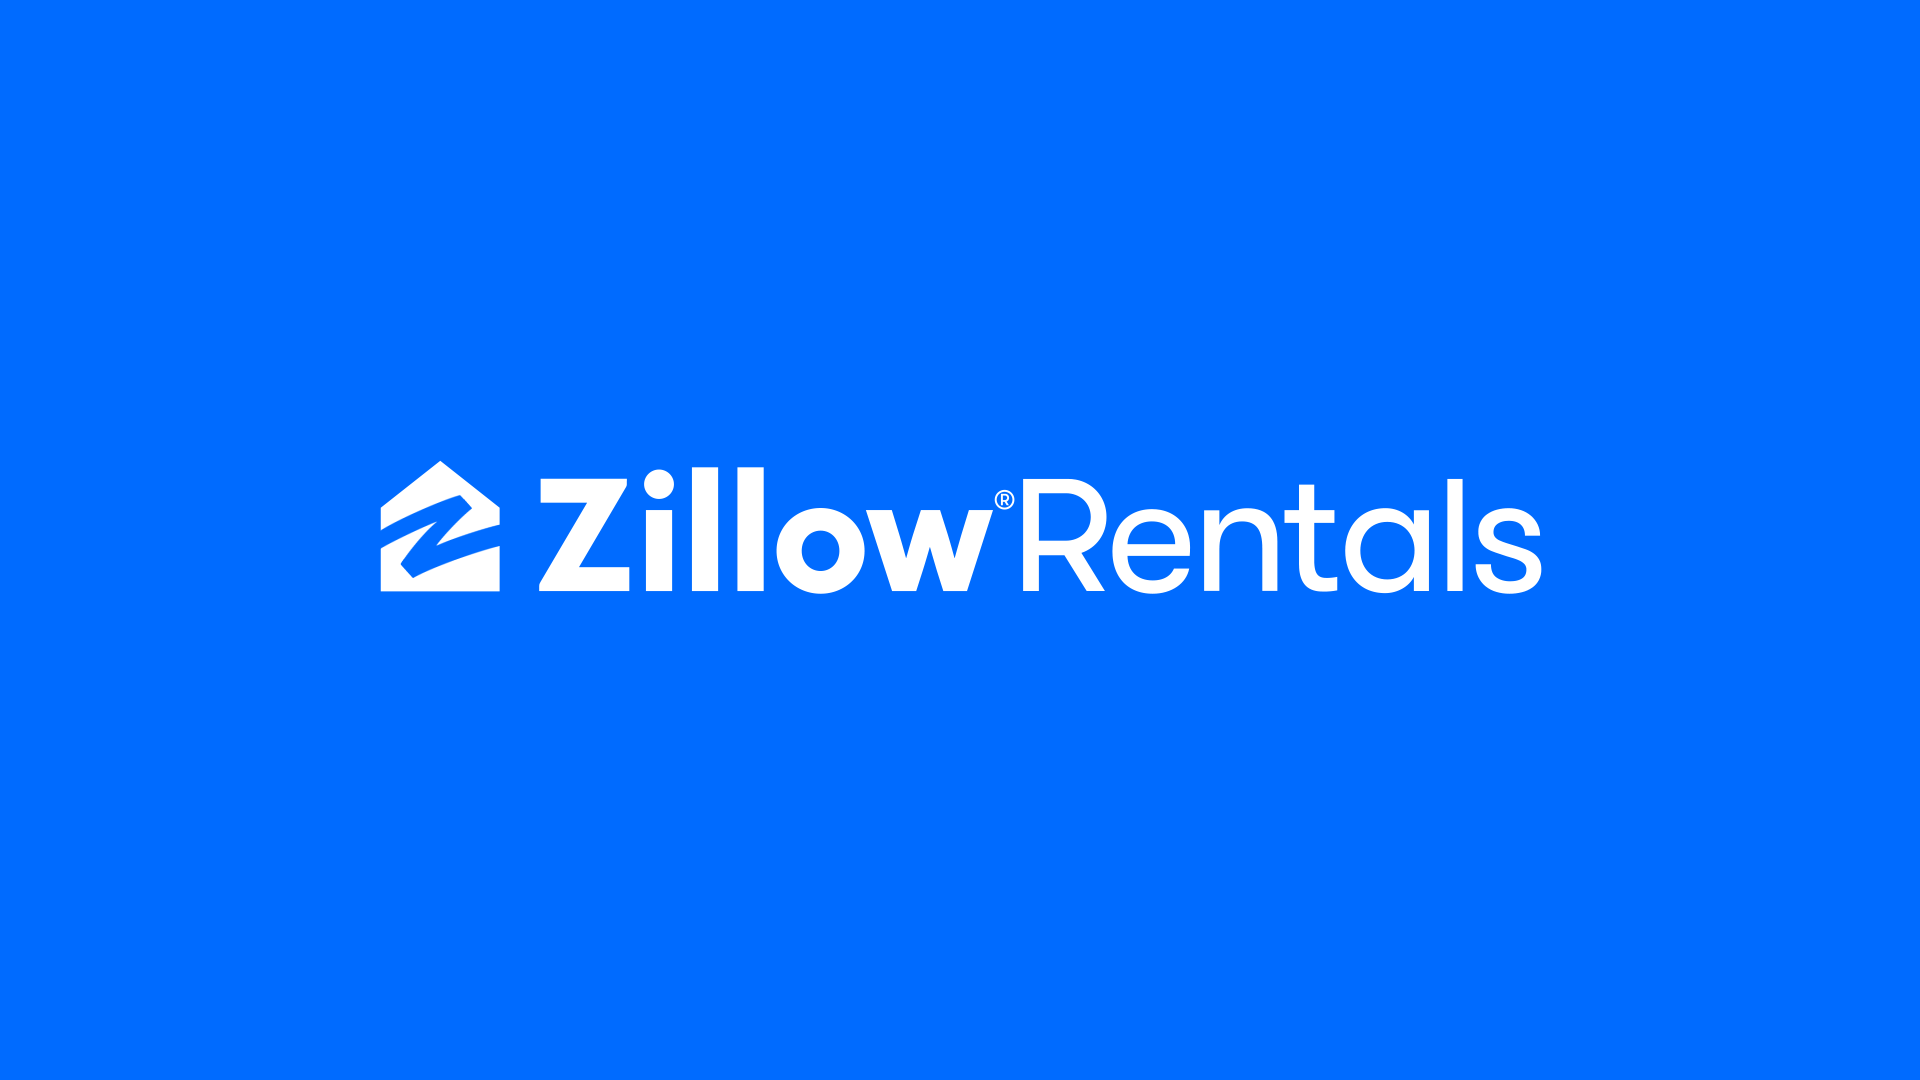 Rent Your House On Zillow